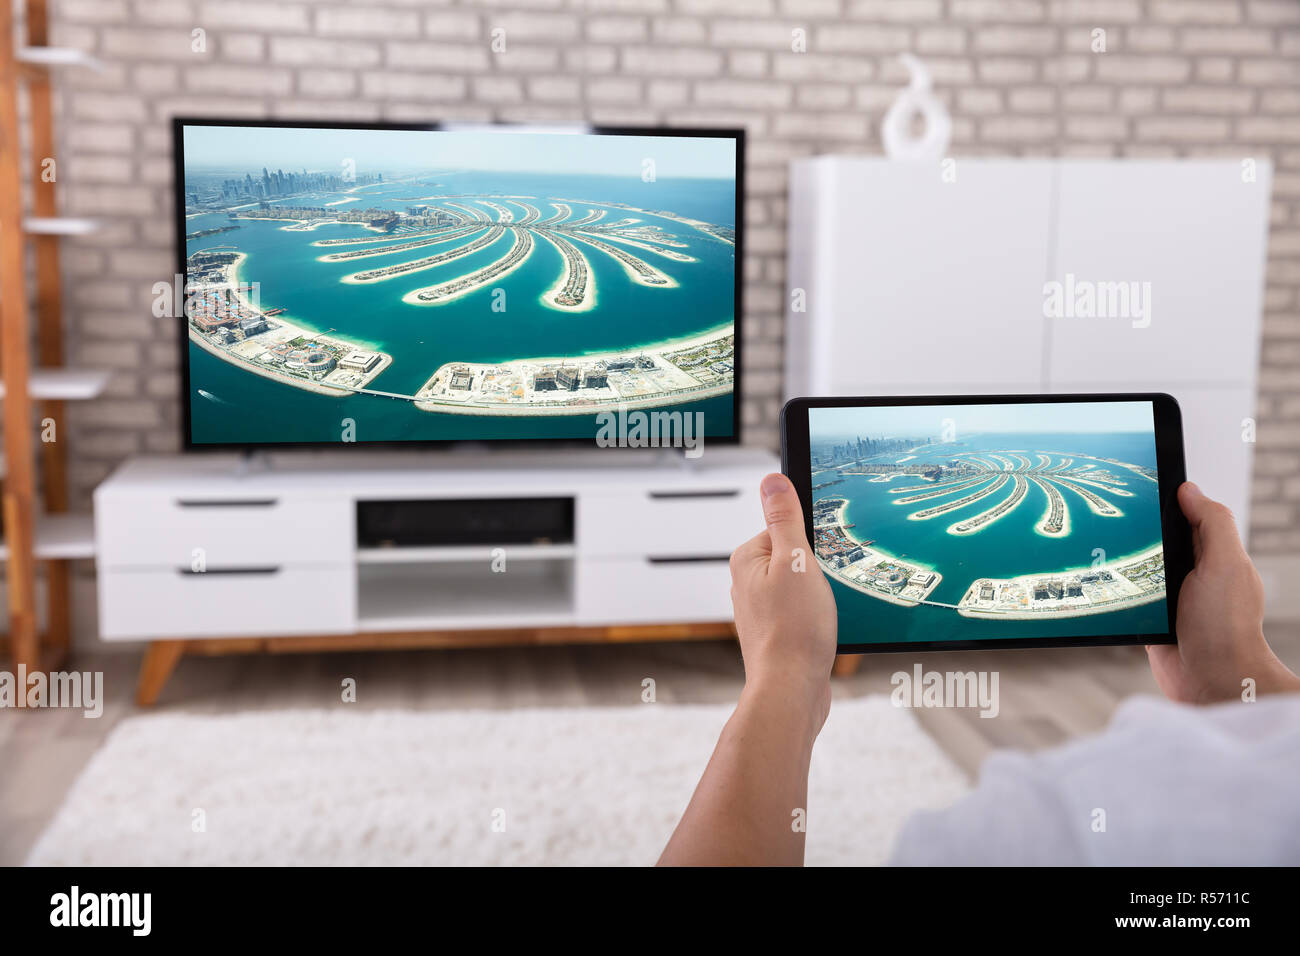 Man Holding Digital Tablet In Front Of Television Streaming Movie Stock Photo